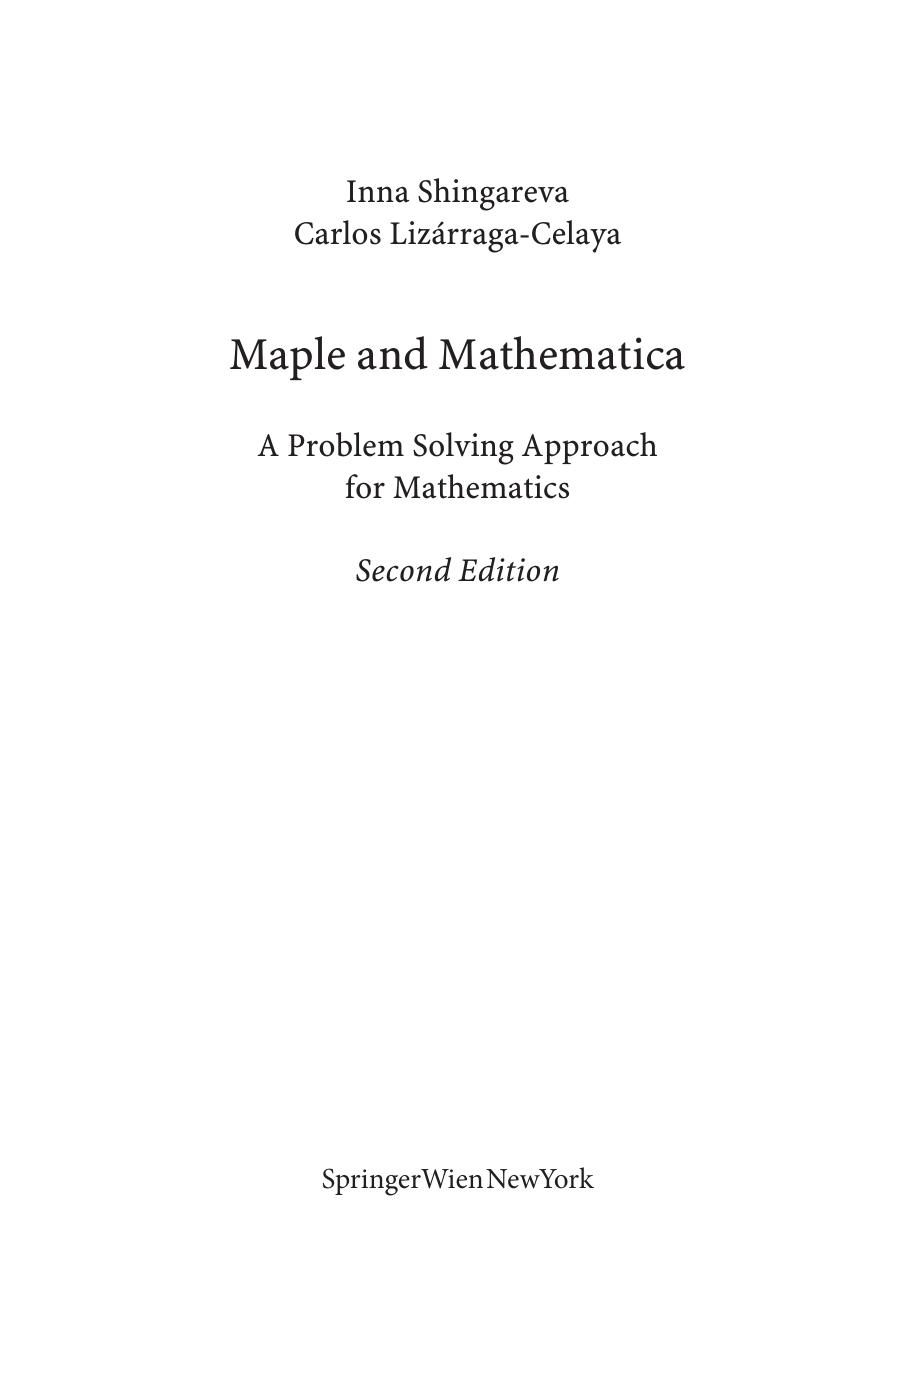 Maple® and Mathematica®, A Problem Solving Approach for Mathematics